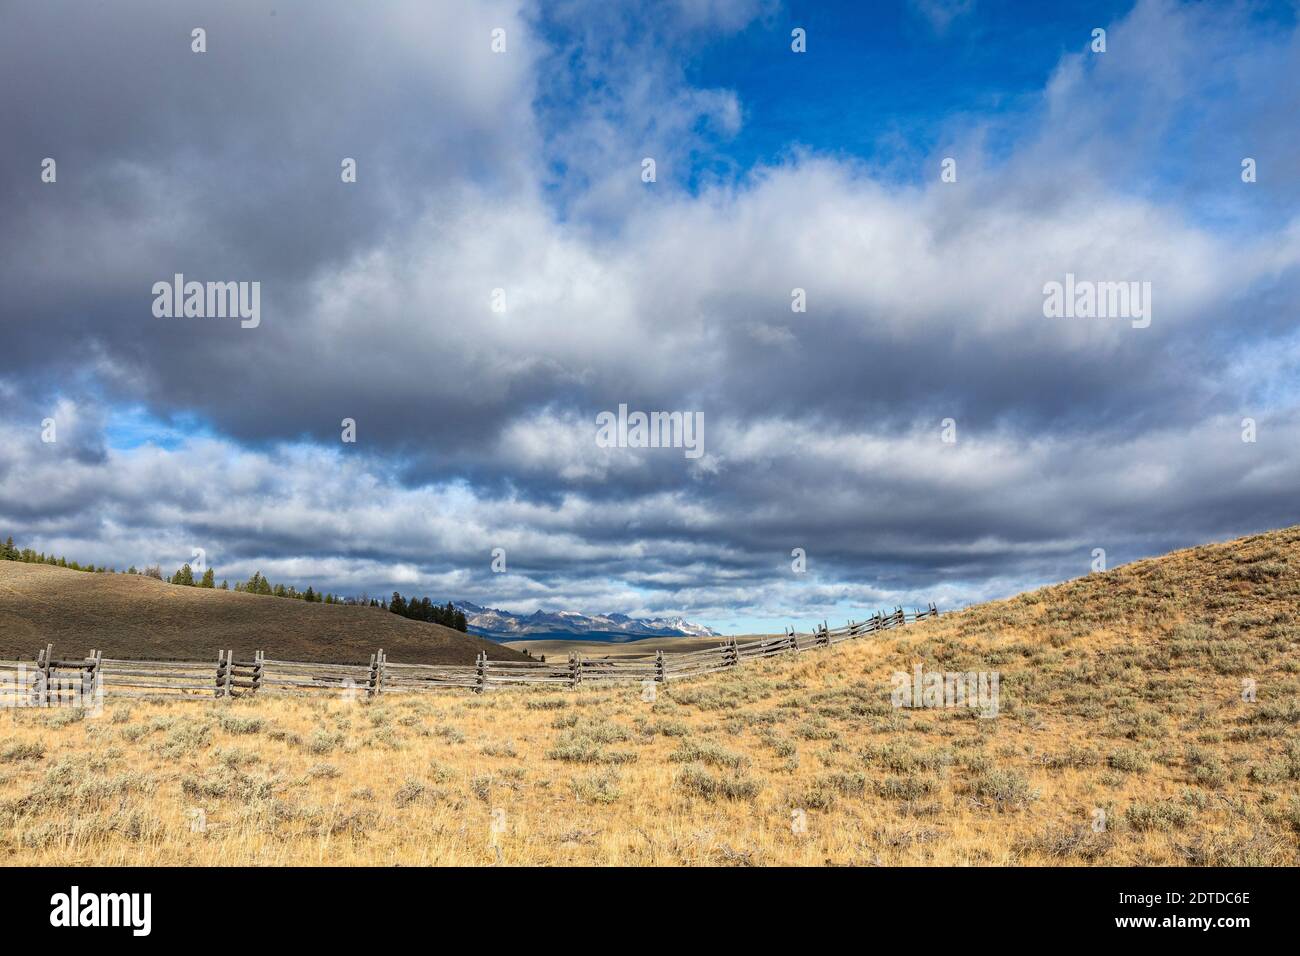 USA, Idaho, Stanley, Ranch landscape with clouds and mountains in distance Stock Photo